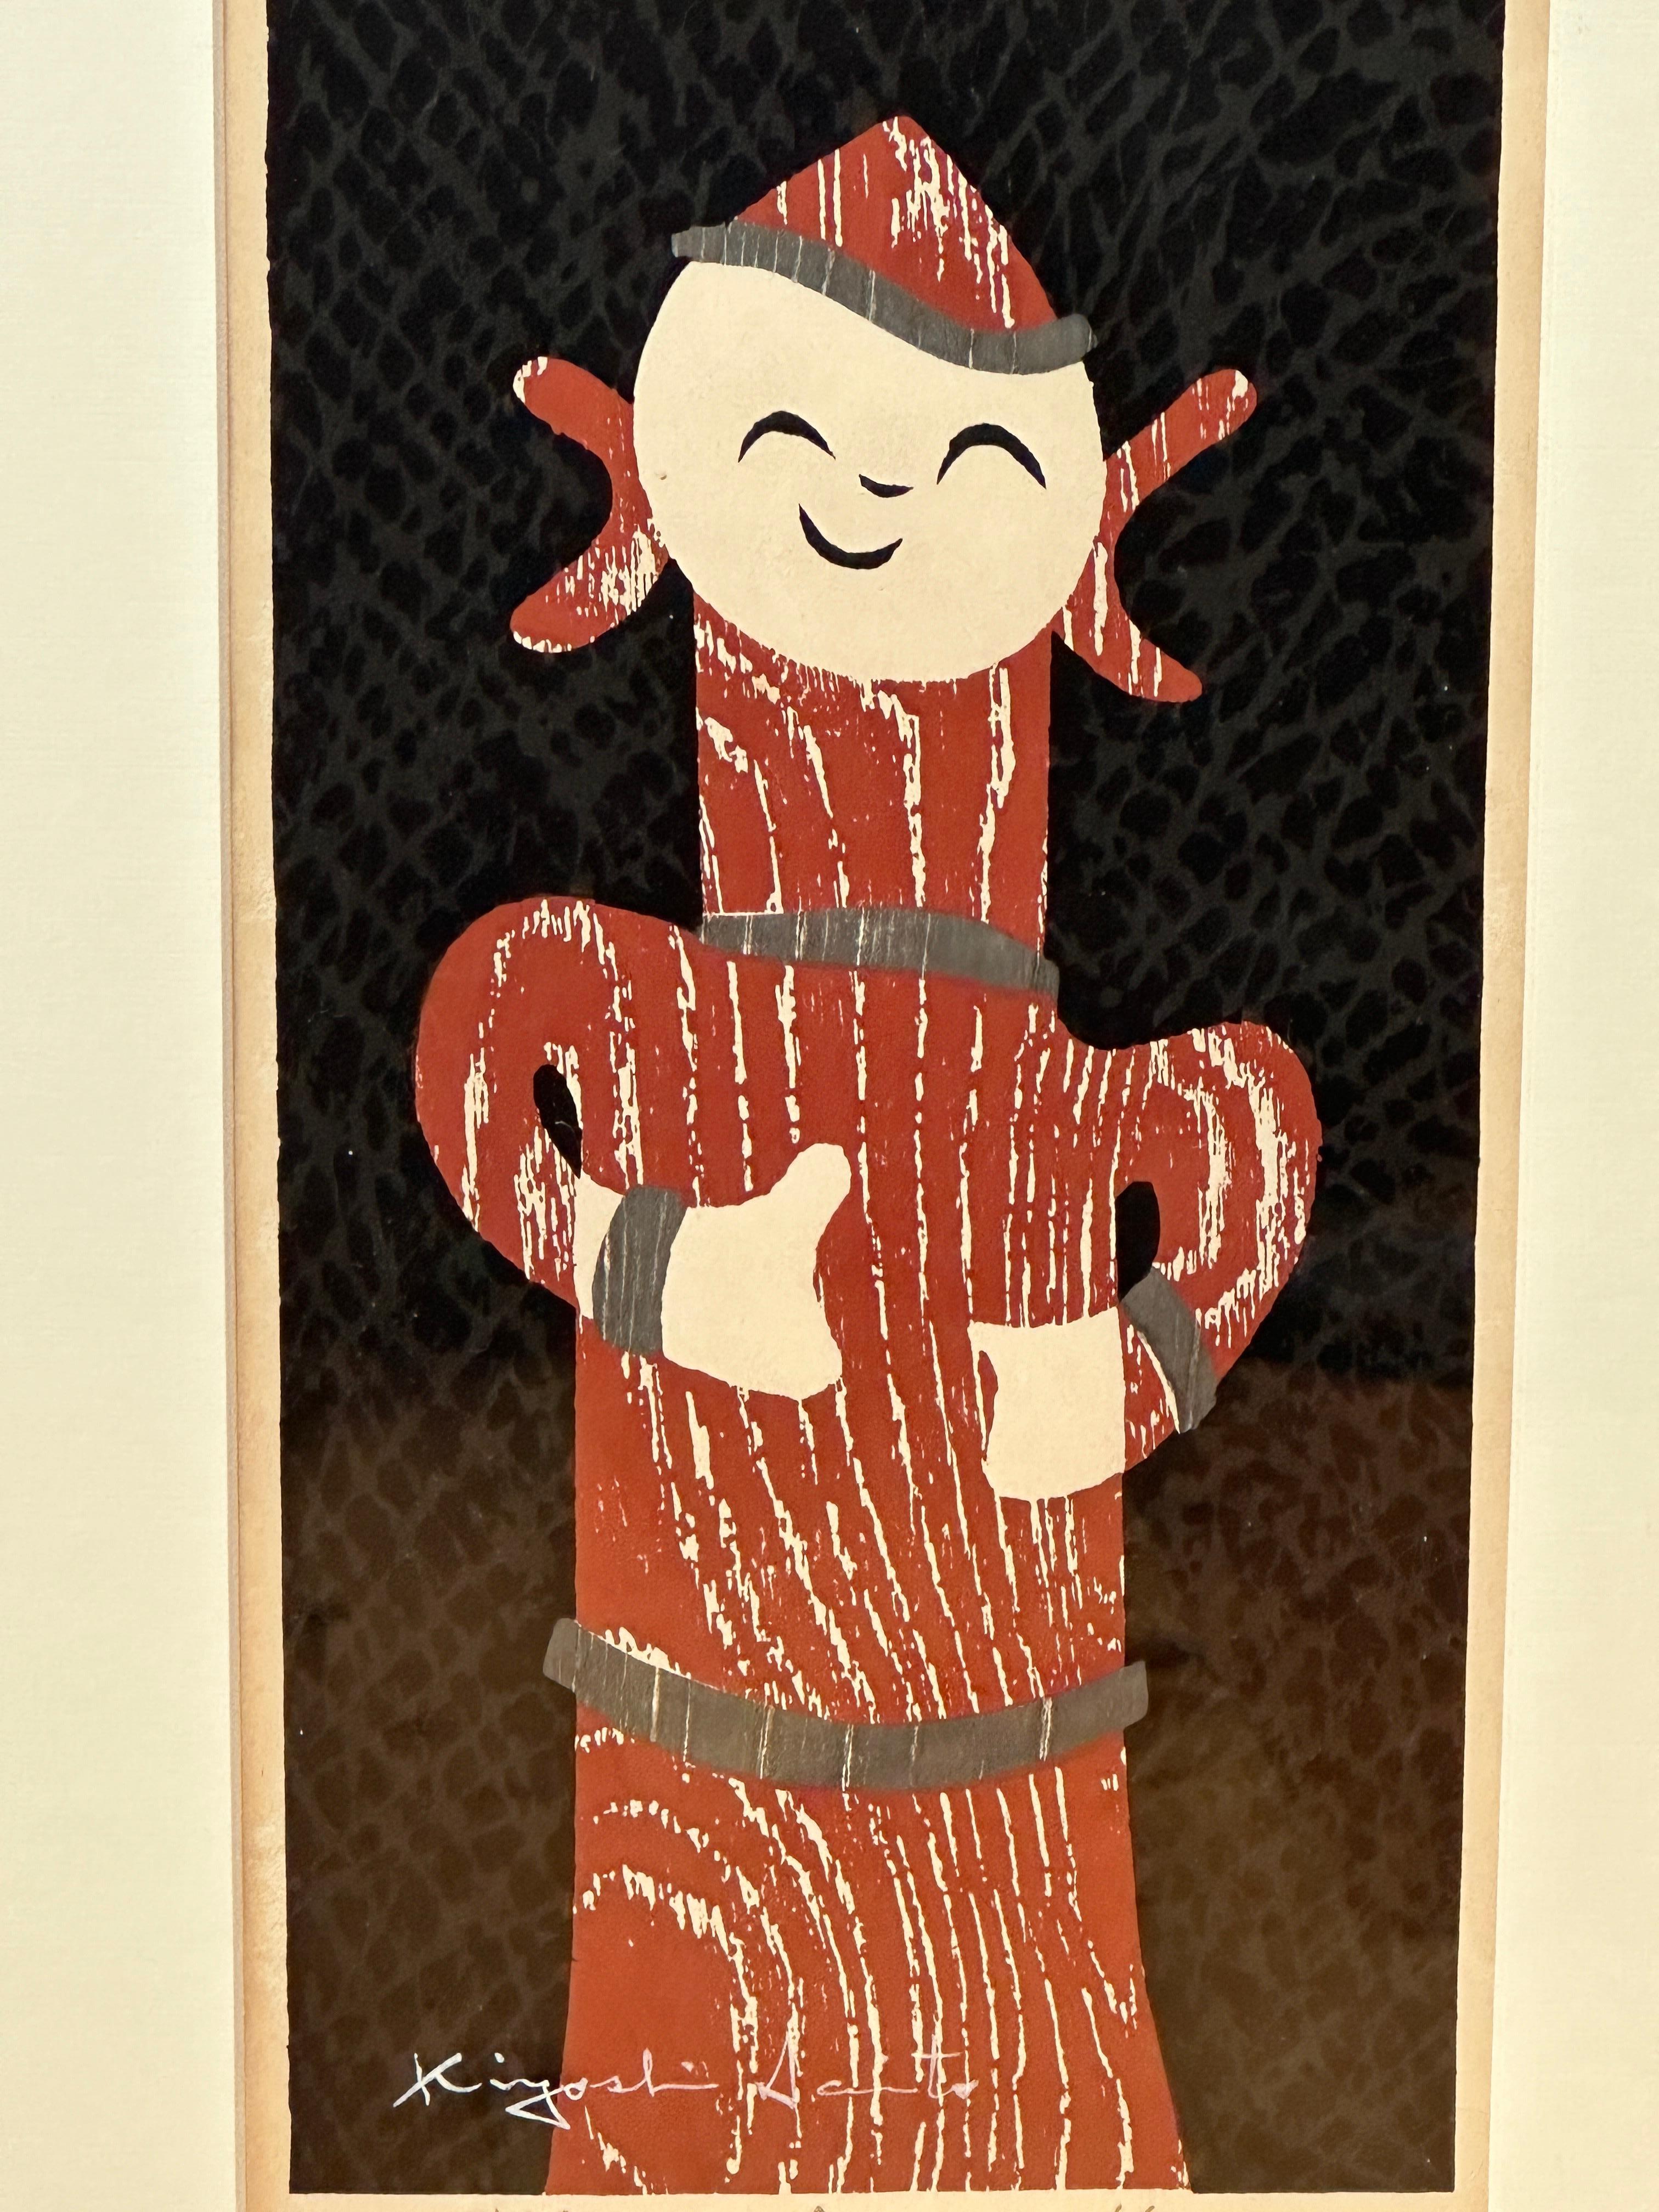 This Japanese woodcut by Kiyoshi Saito (1907-1997) honors Japan's rich cultural heritage, specifically the Haniwa terracotta figures crafted for ritual purposes and buried alongside the deceased as funerary offerings during the Kofun period (3rd-6th